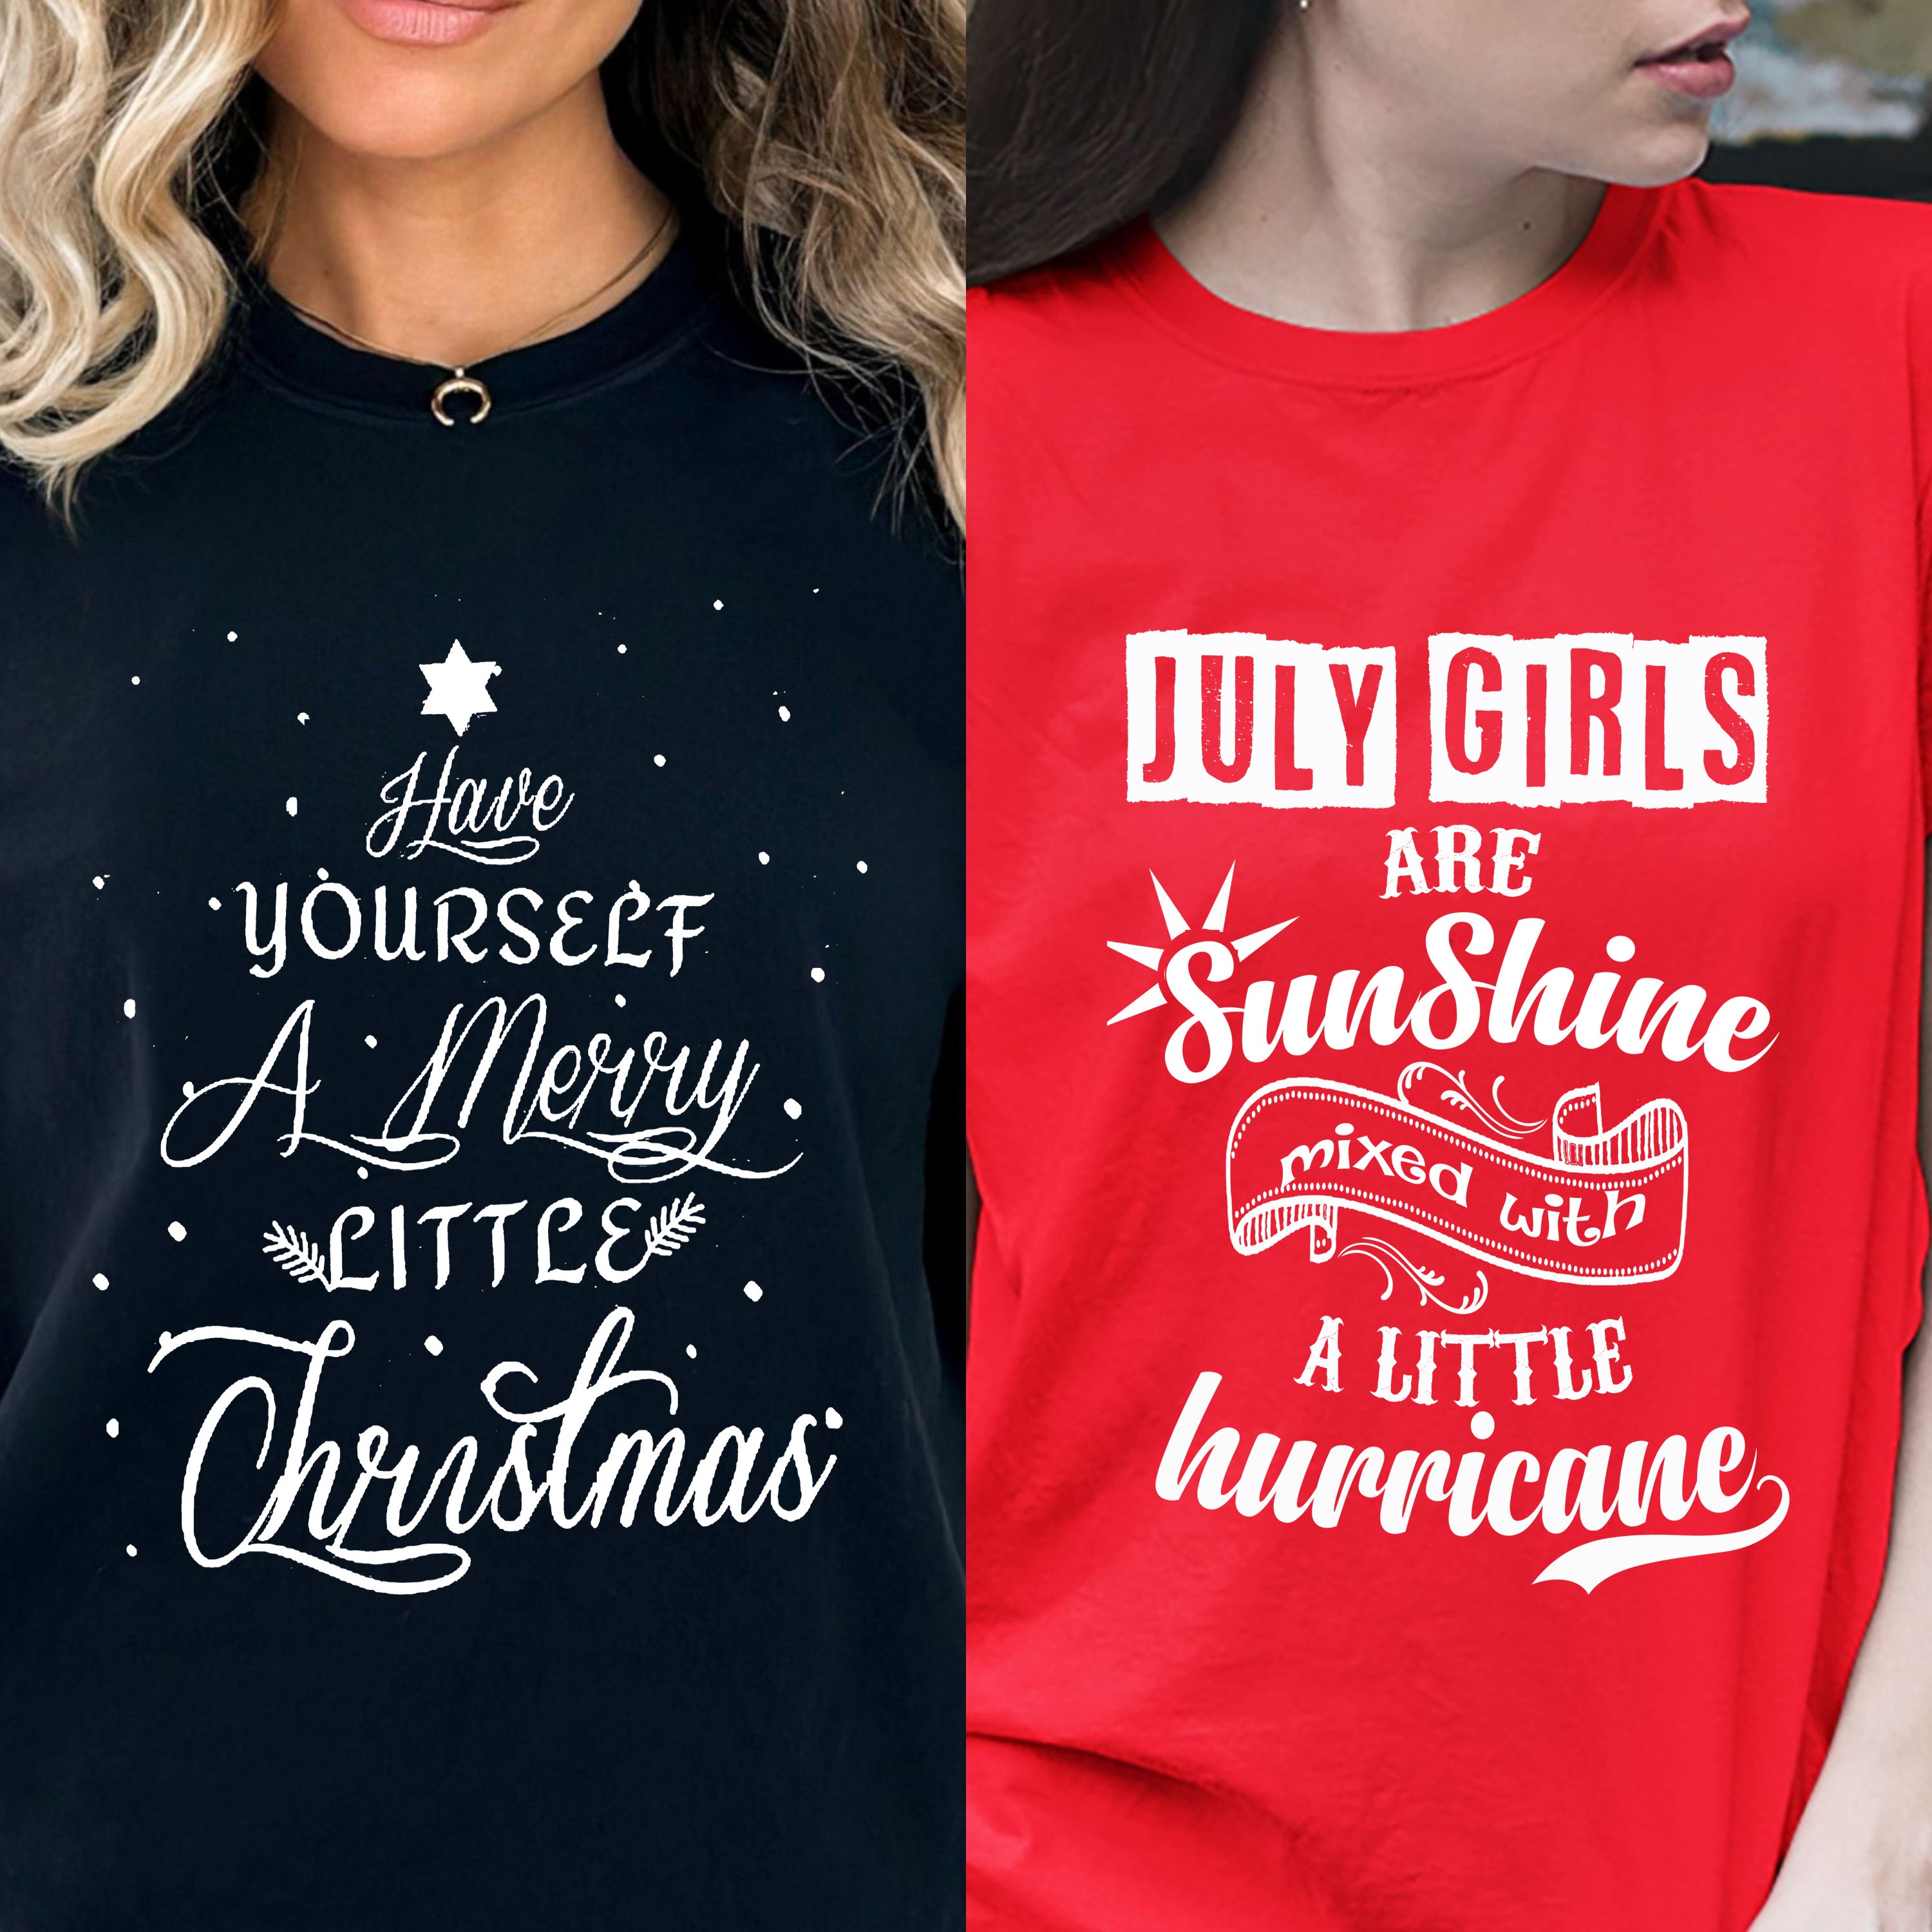 "2 Awesome Designs Combo- July Sunshine + Merry Little Christmas".